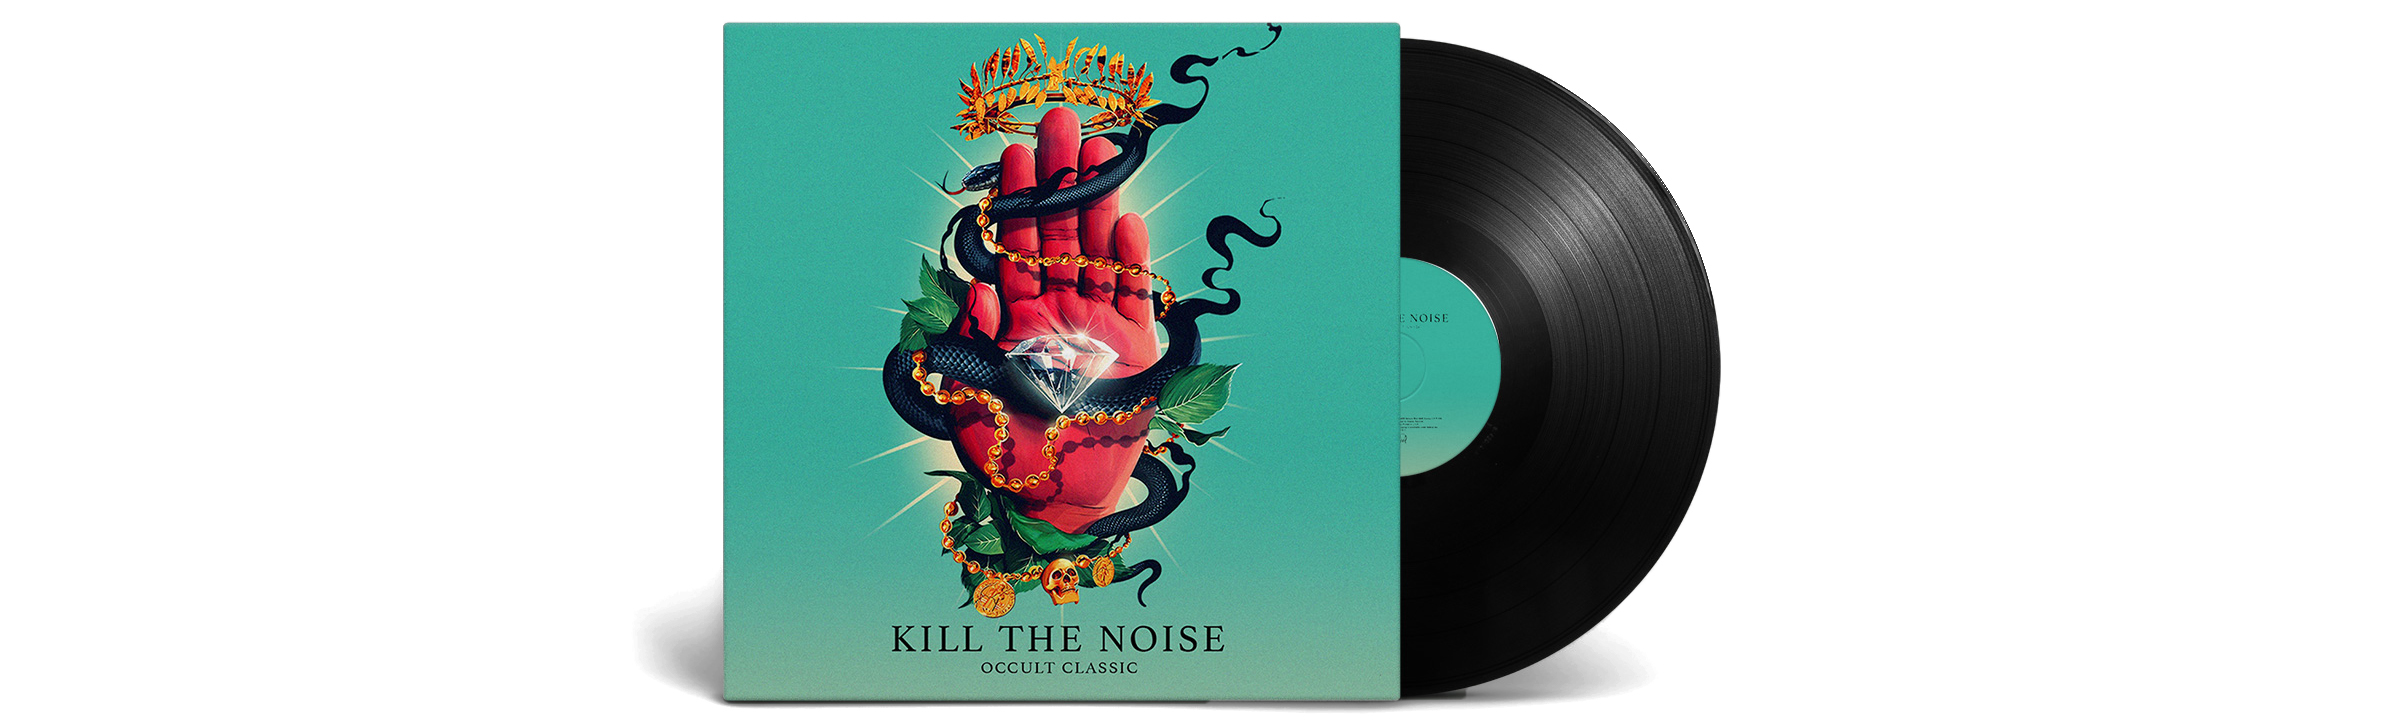 Kill the Noise. Kill the Noise шрифт. The Noise мягкая игрушка. Thumbs up Kill the Noise. Feel the noise